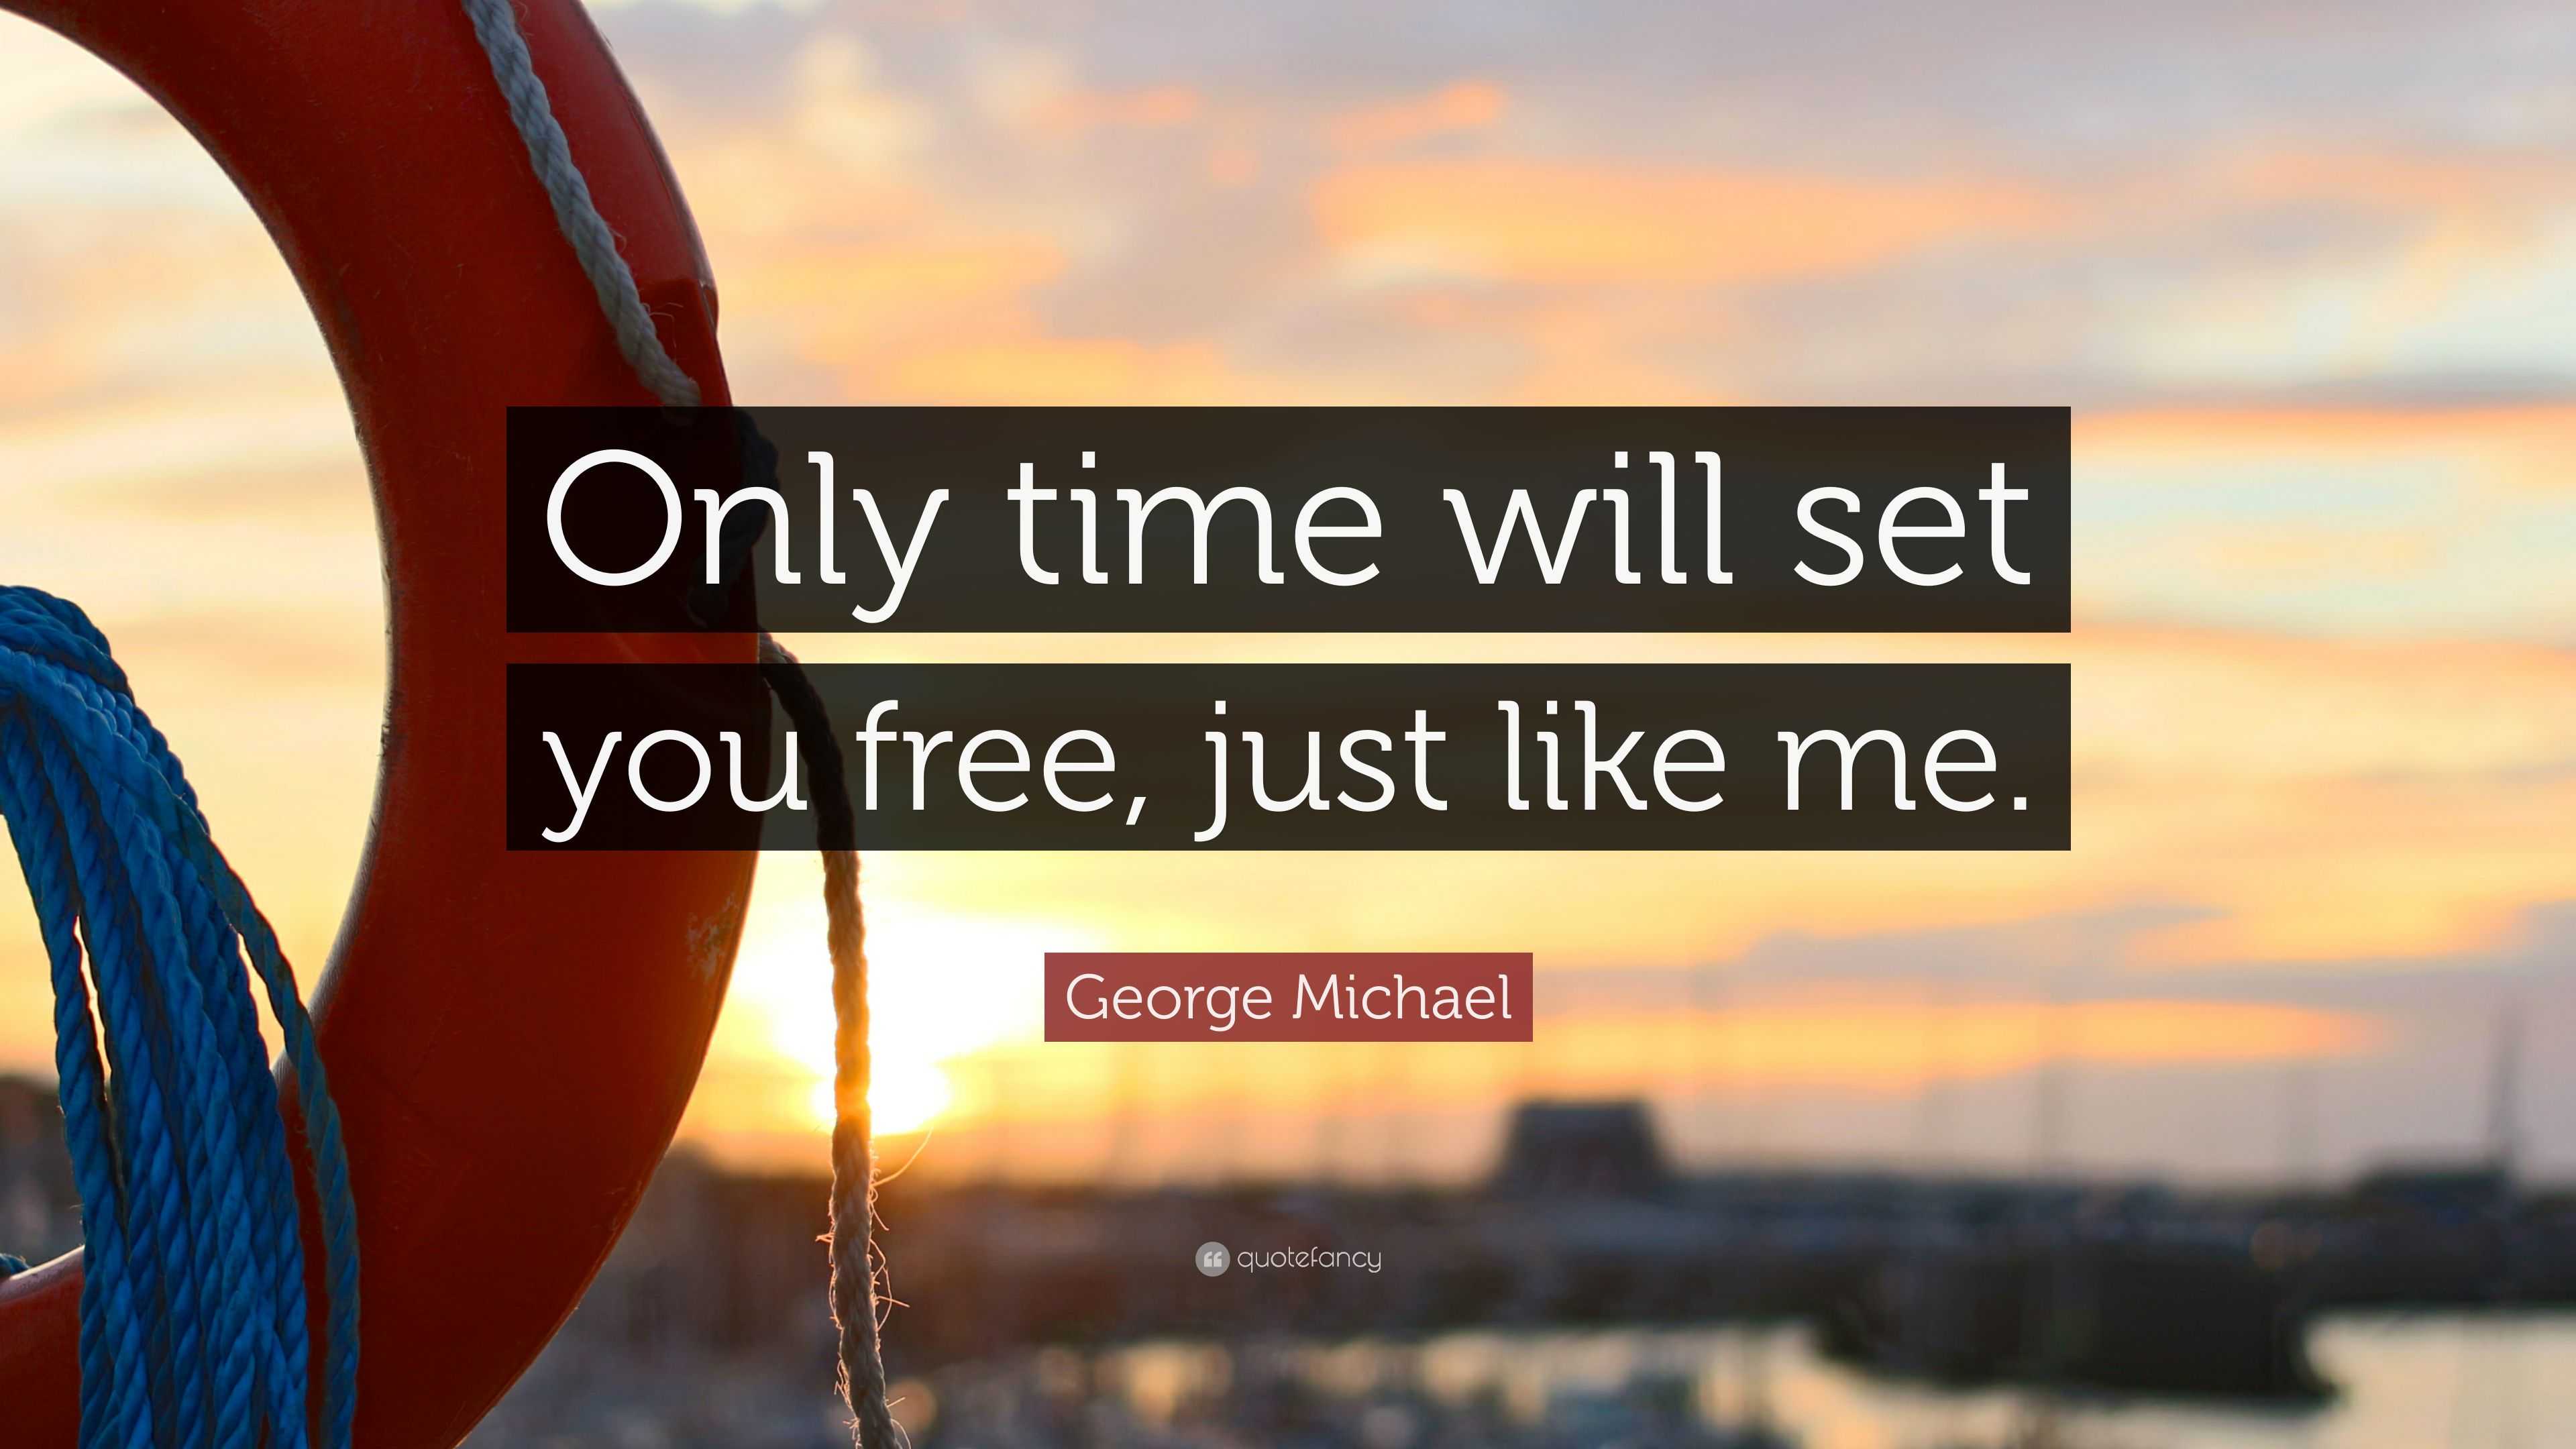 George Michael Quote “ ly time will set you free just like me